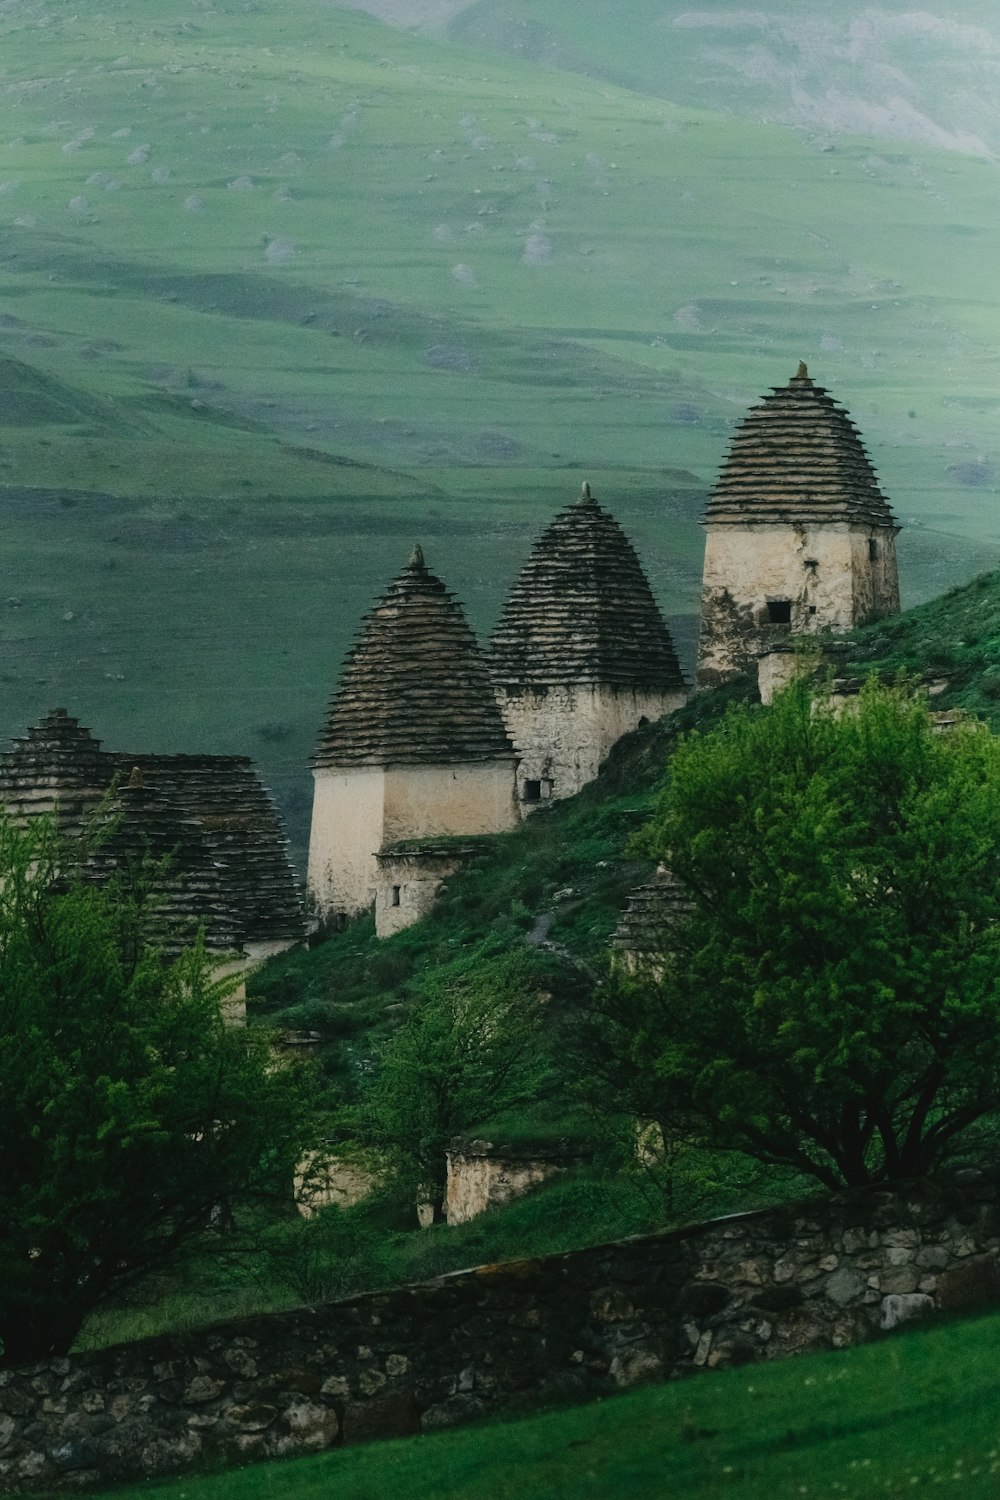 a group of buildings sitting on top of a lush green hillside